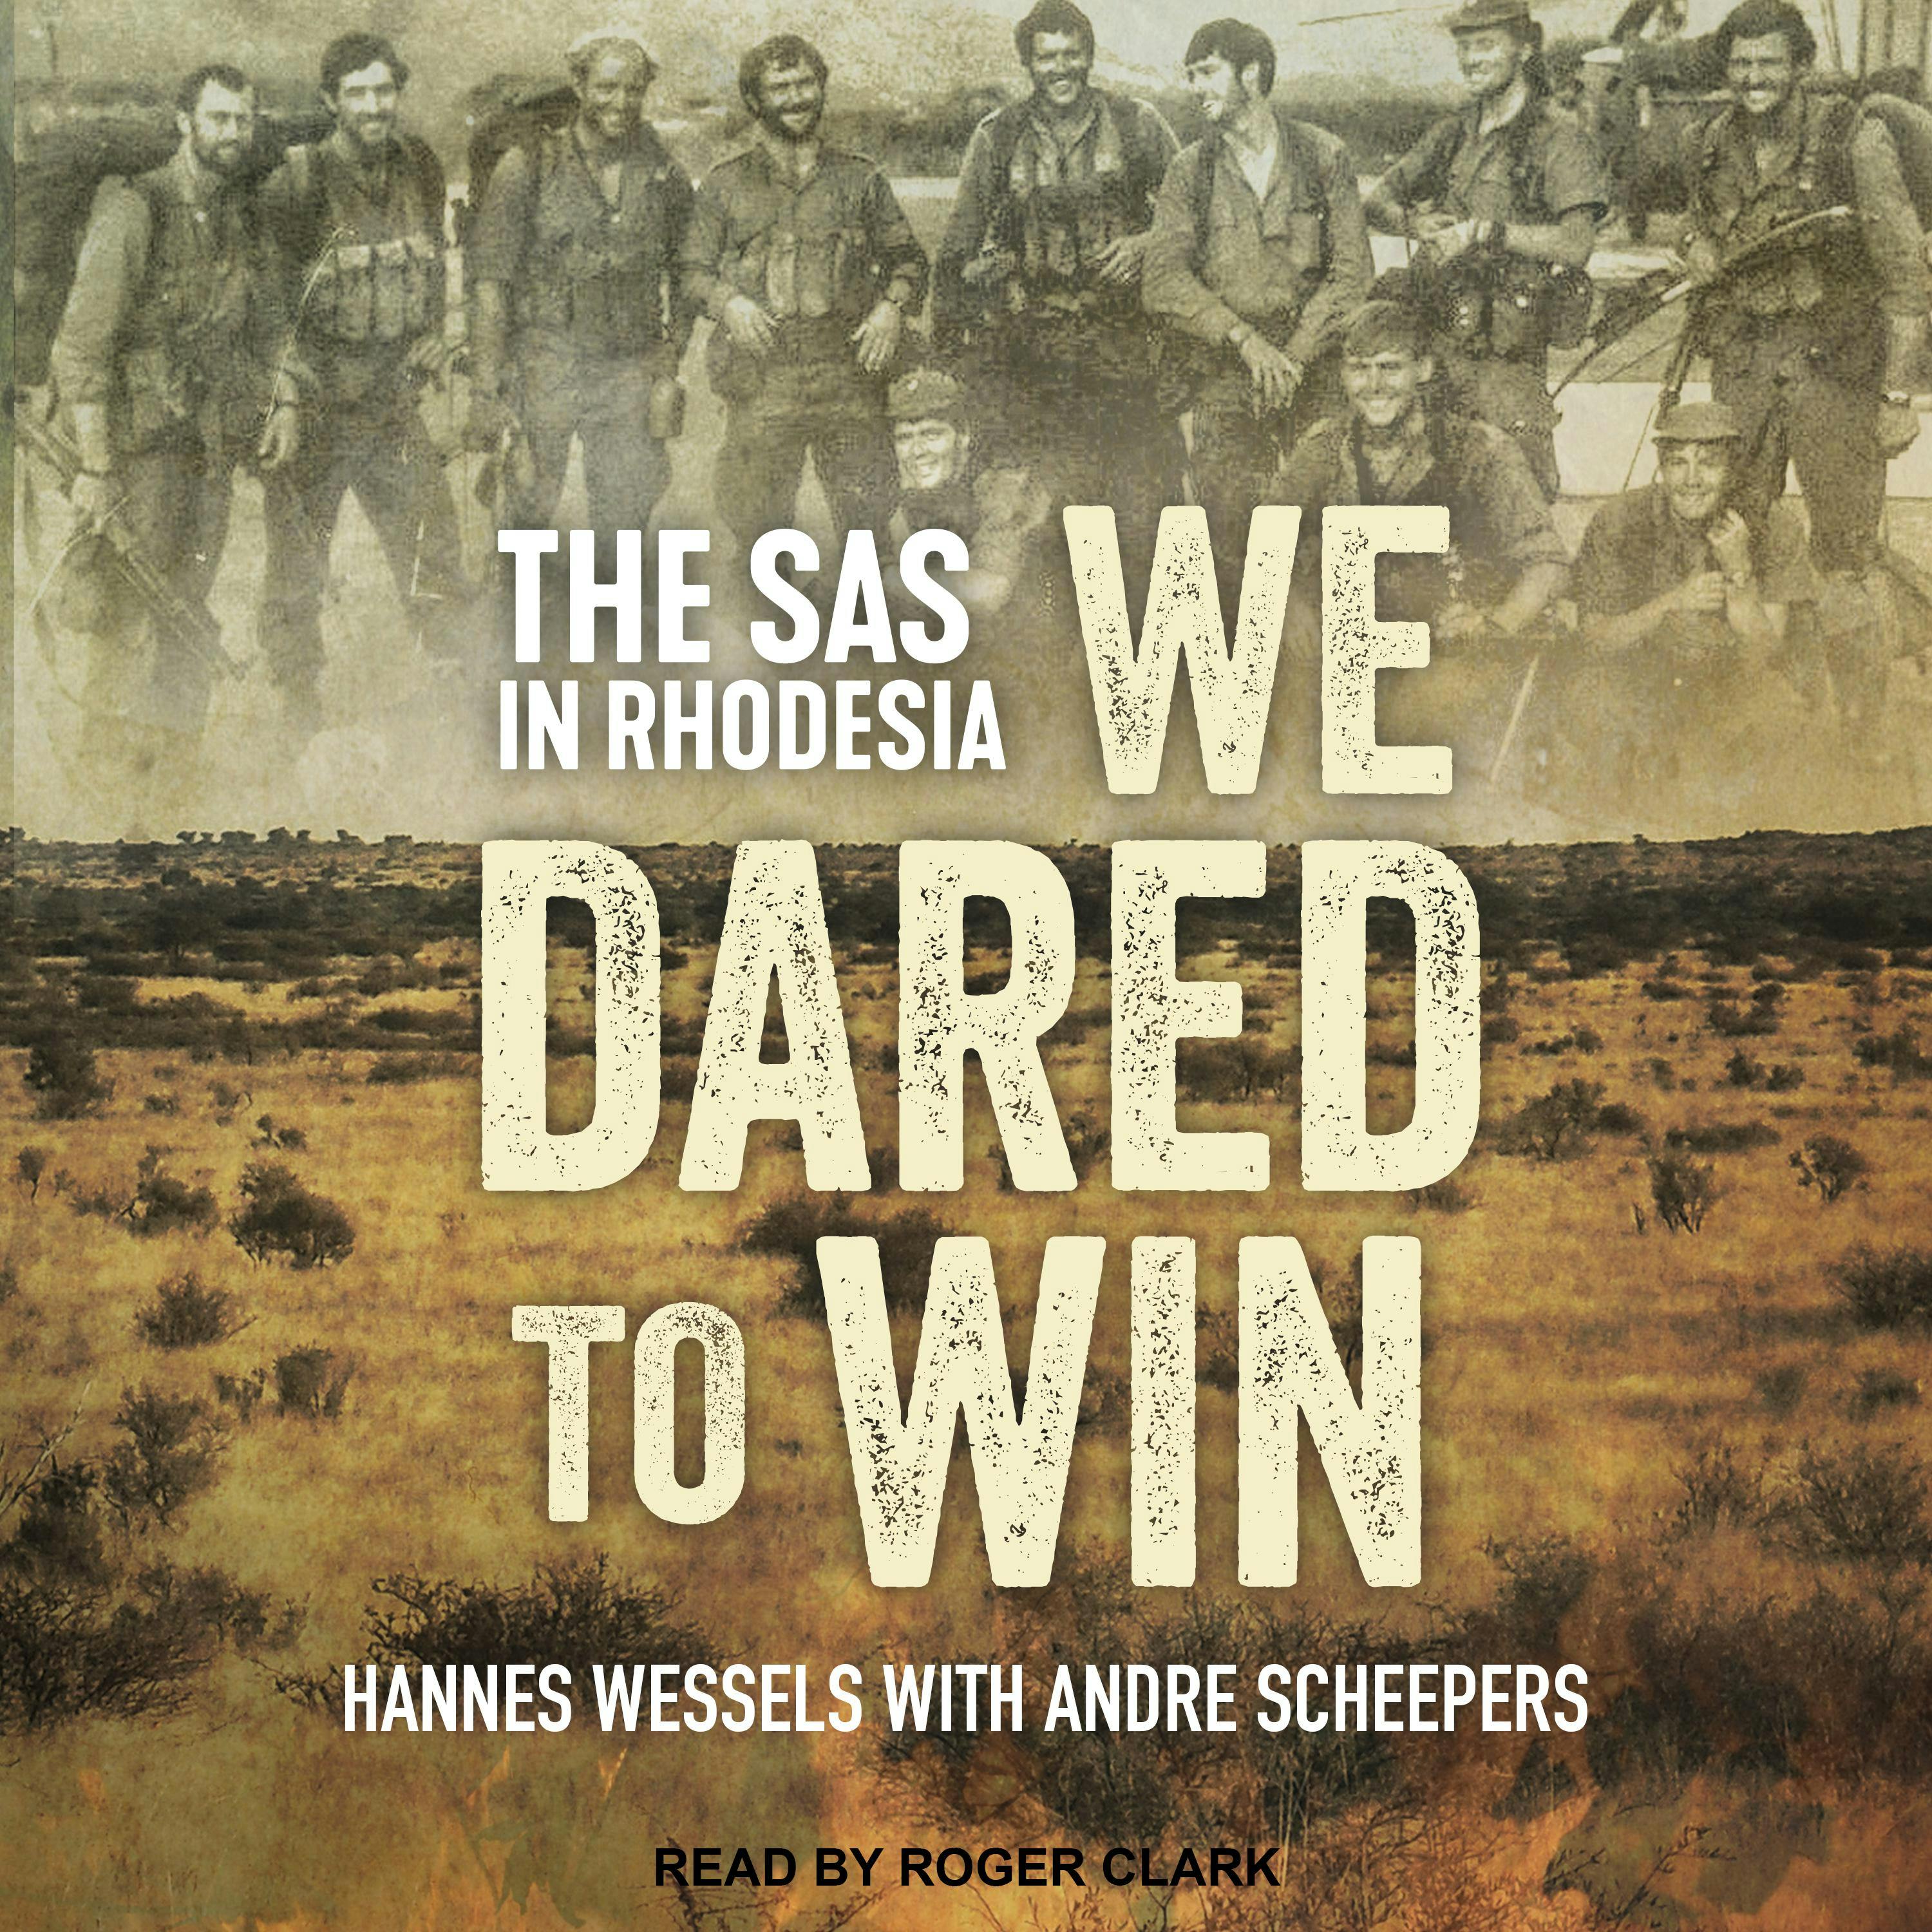 We Dared to Win: The SAS in Rhodesia - Andre Scheepers, Hannes Wessels